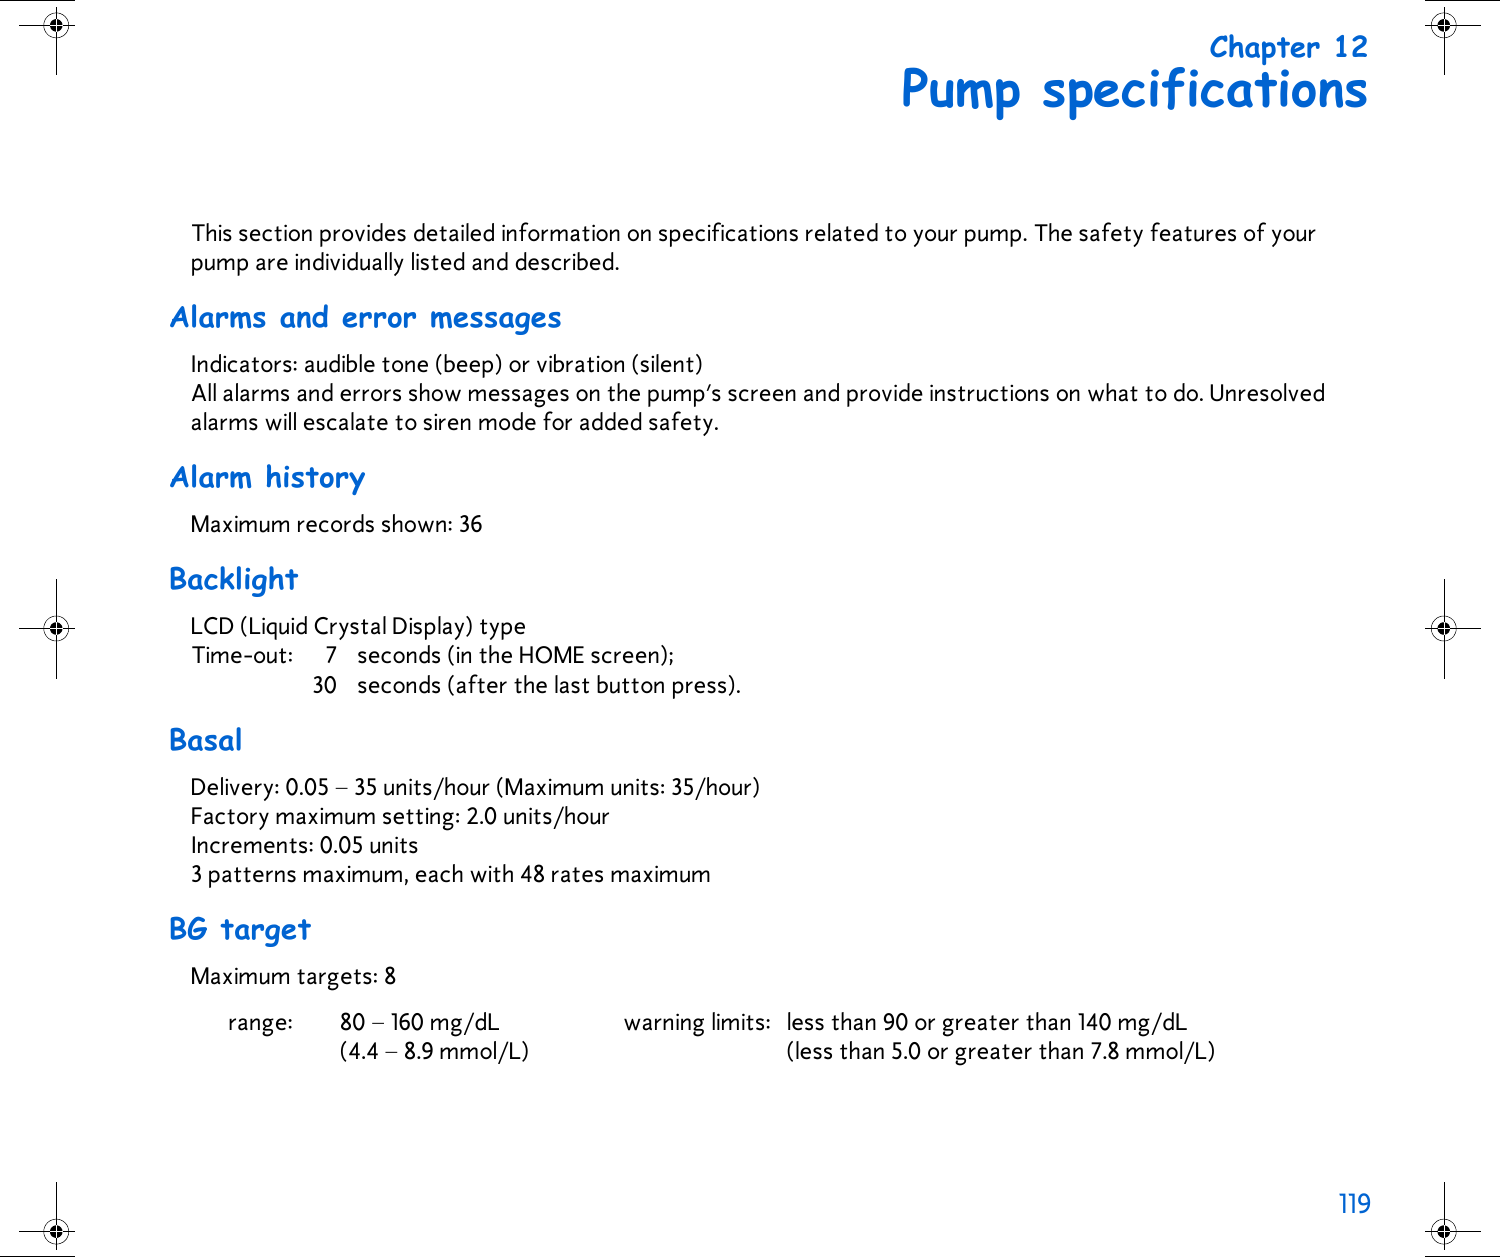 119 Chapter 12Pump specificationsThis section provides detailed information on specifications related to your pump. The safety features of your pump are individually listed and described.Alarms and error messagesIndicators: audible tone (beep) or vibration (silent)All alarms and errors show messages on the pump’s screen and provide instructions on what to do. Unresolved alarms will escalate to siren mode for added safety.Alarm historyMaximum records shown: 36BacklightLCD (Liquid Crystal Display) typeTime-out: 7 seconds (in the HOME screen); 30 seconds (after the last button press).BasalDelivery: 0.05 – 35 units/hour (Maximum units: 35/hour)Factory maximum setting: 2.0 units/hour Increments: 0.05 units 3 patterns maximum, each with 48 rates maximumBG targetMaximum targets: 8 range: 80 – 160 mg/dL (4.4 – 8.9 mmol/L)warning limits: less than 90 or greater than 140 mg/dL(less than 5.0 or greater than 7.8 mmol/L)